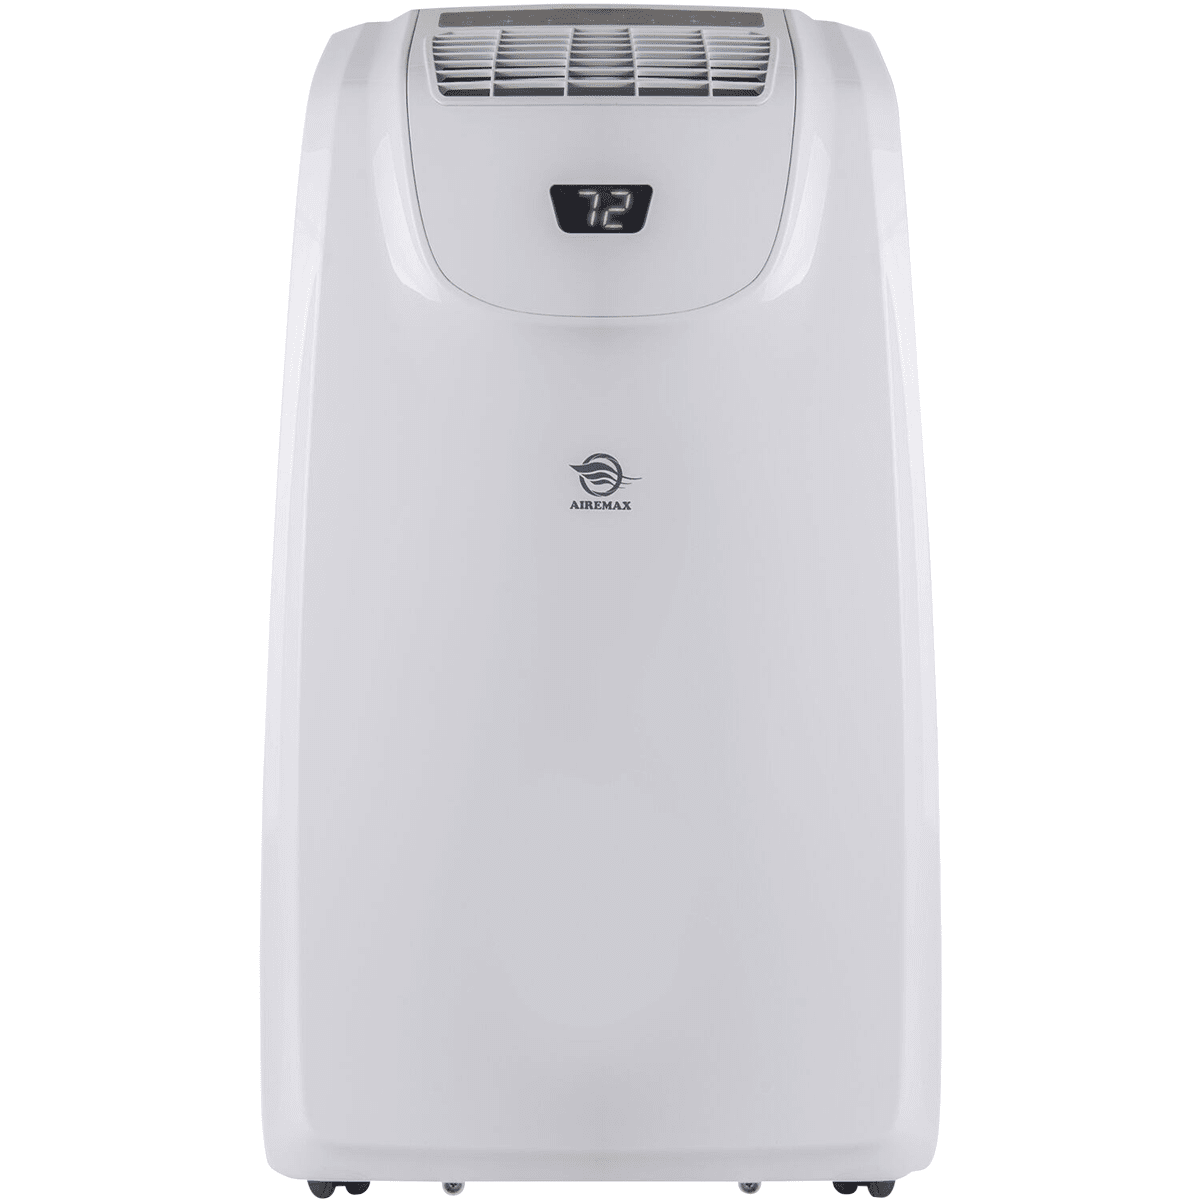 AireMax 8000 BTU SACC Portable Air Conditioner with Supplemental Heat